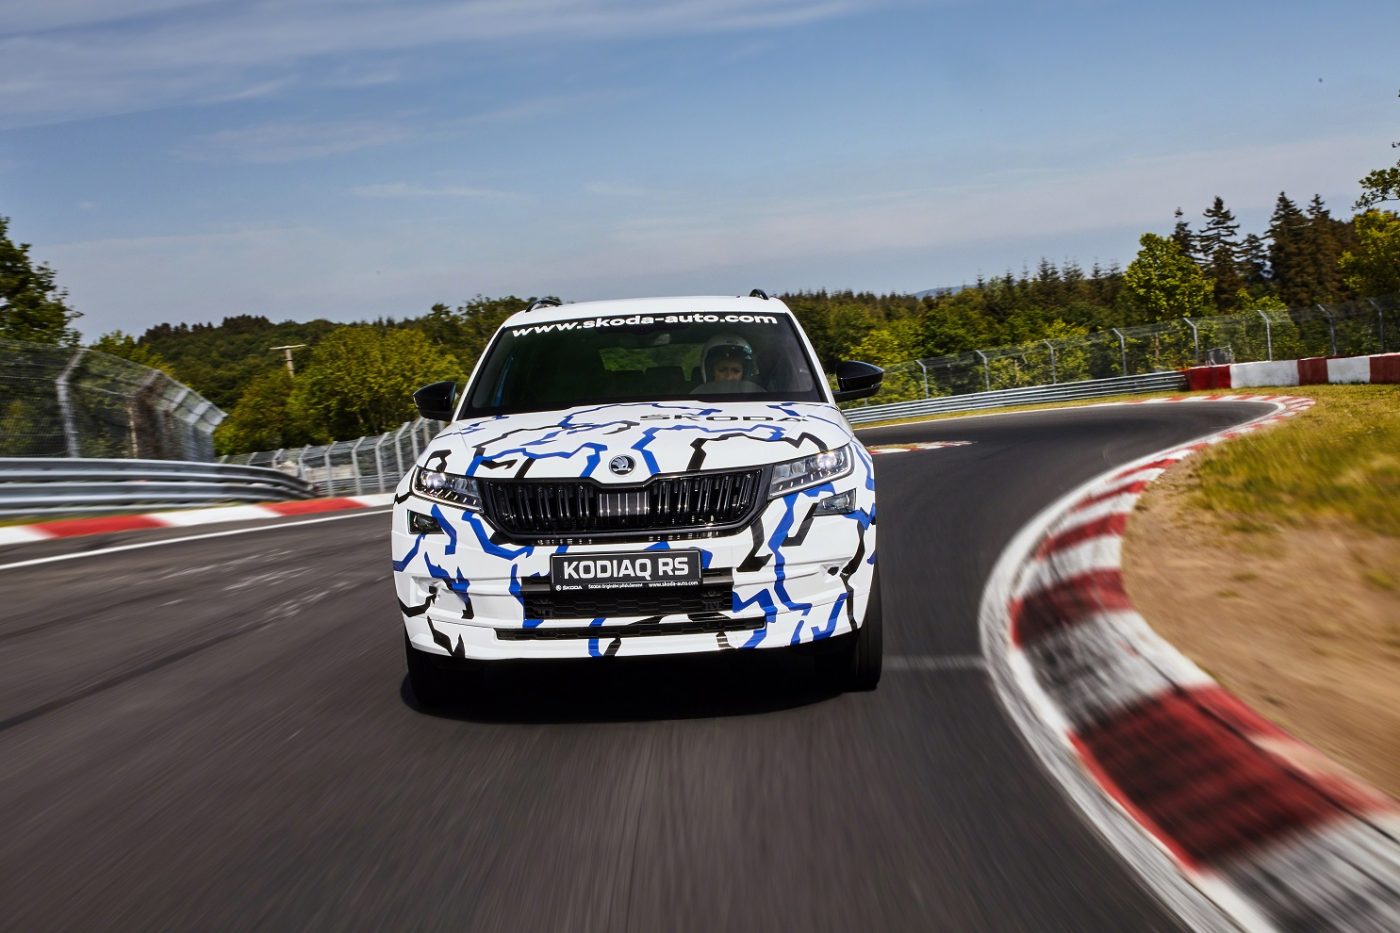 The New Skoda Kodiaq RS SUV Is a Nurburgring Lap-Record Holder